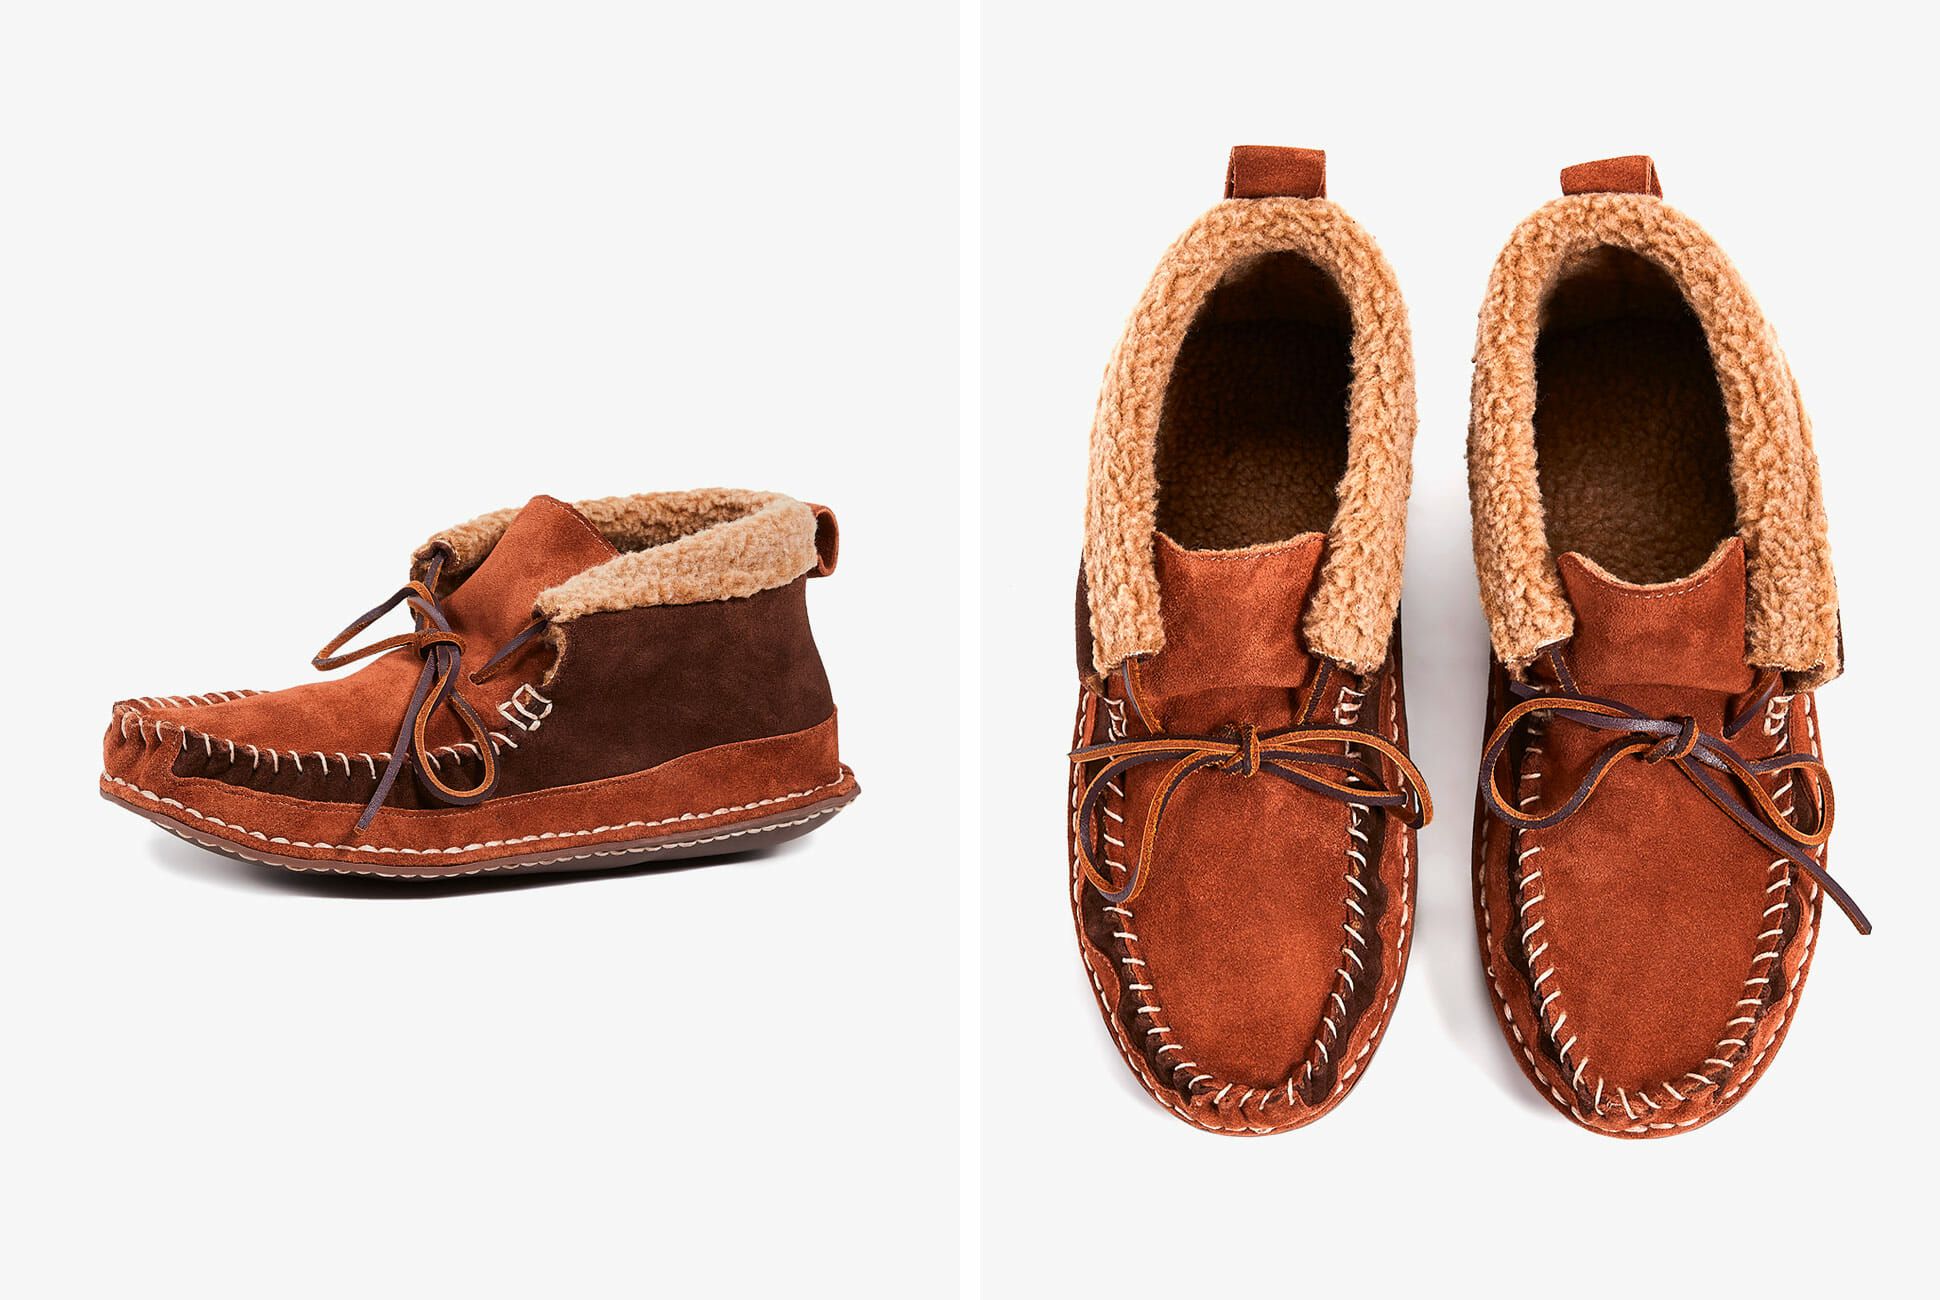 j crew suede shearling slippers